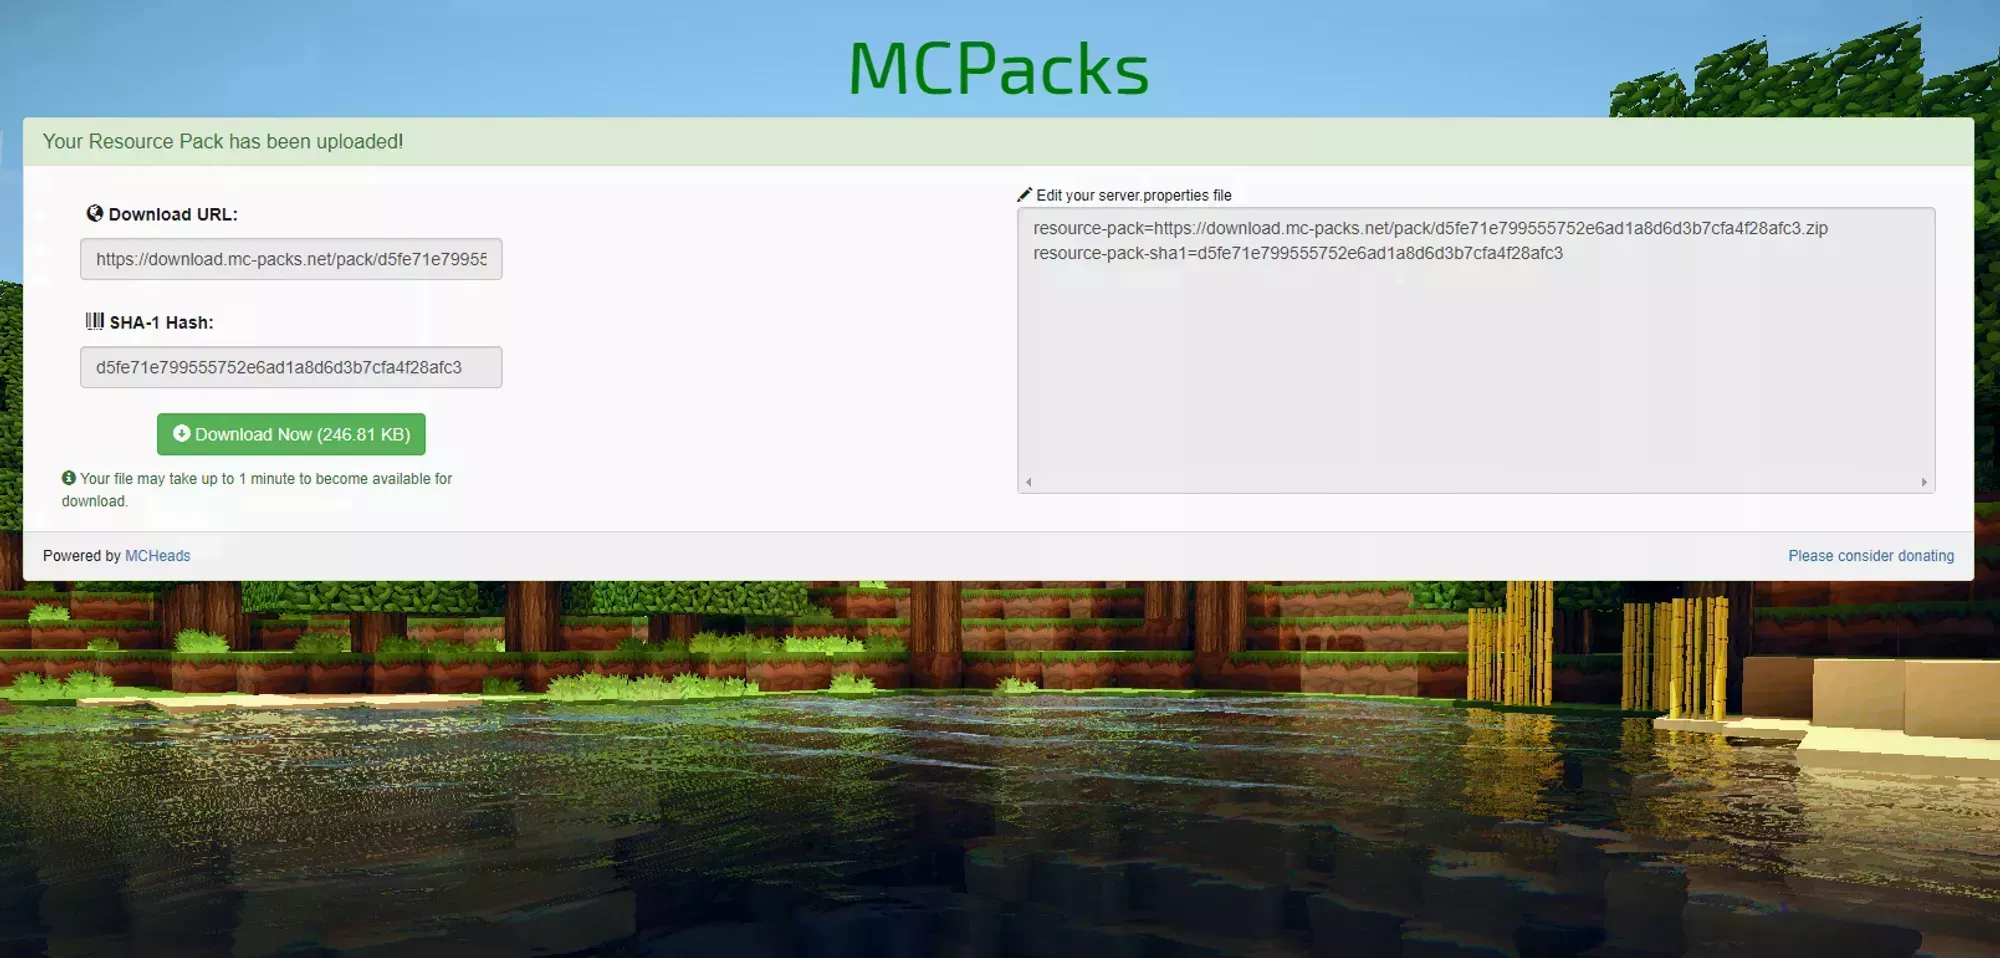 The main page of the MC-Packs website